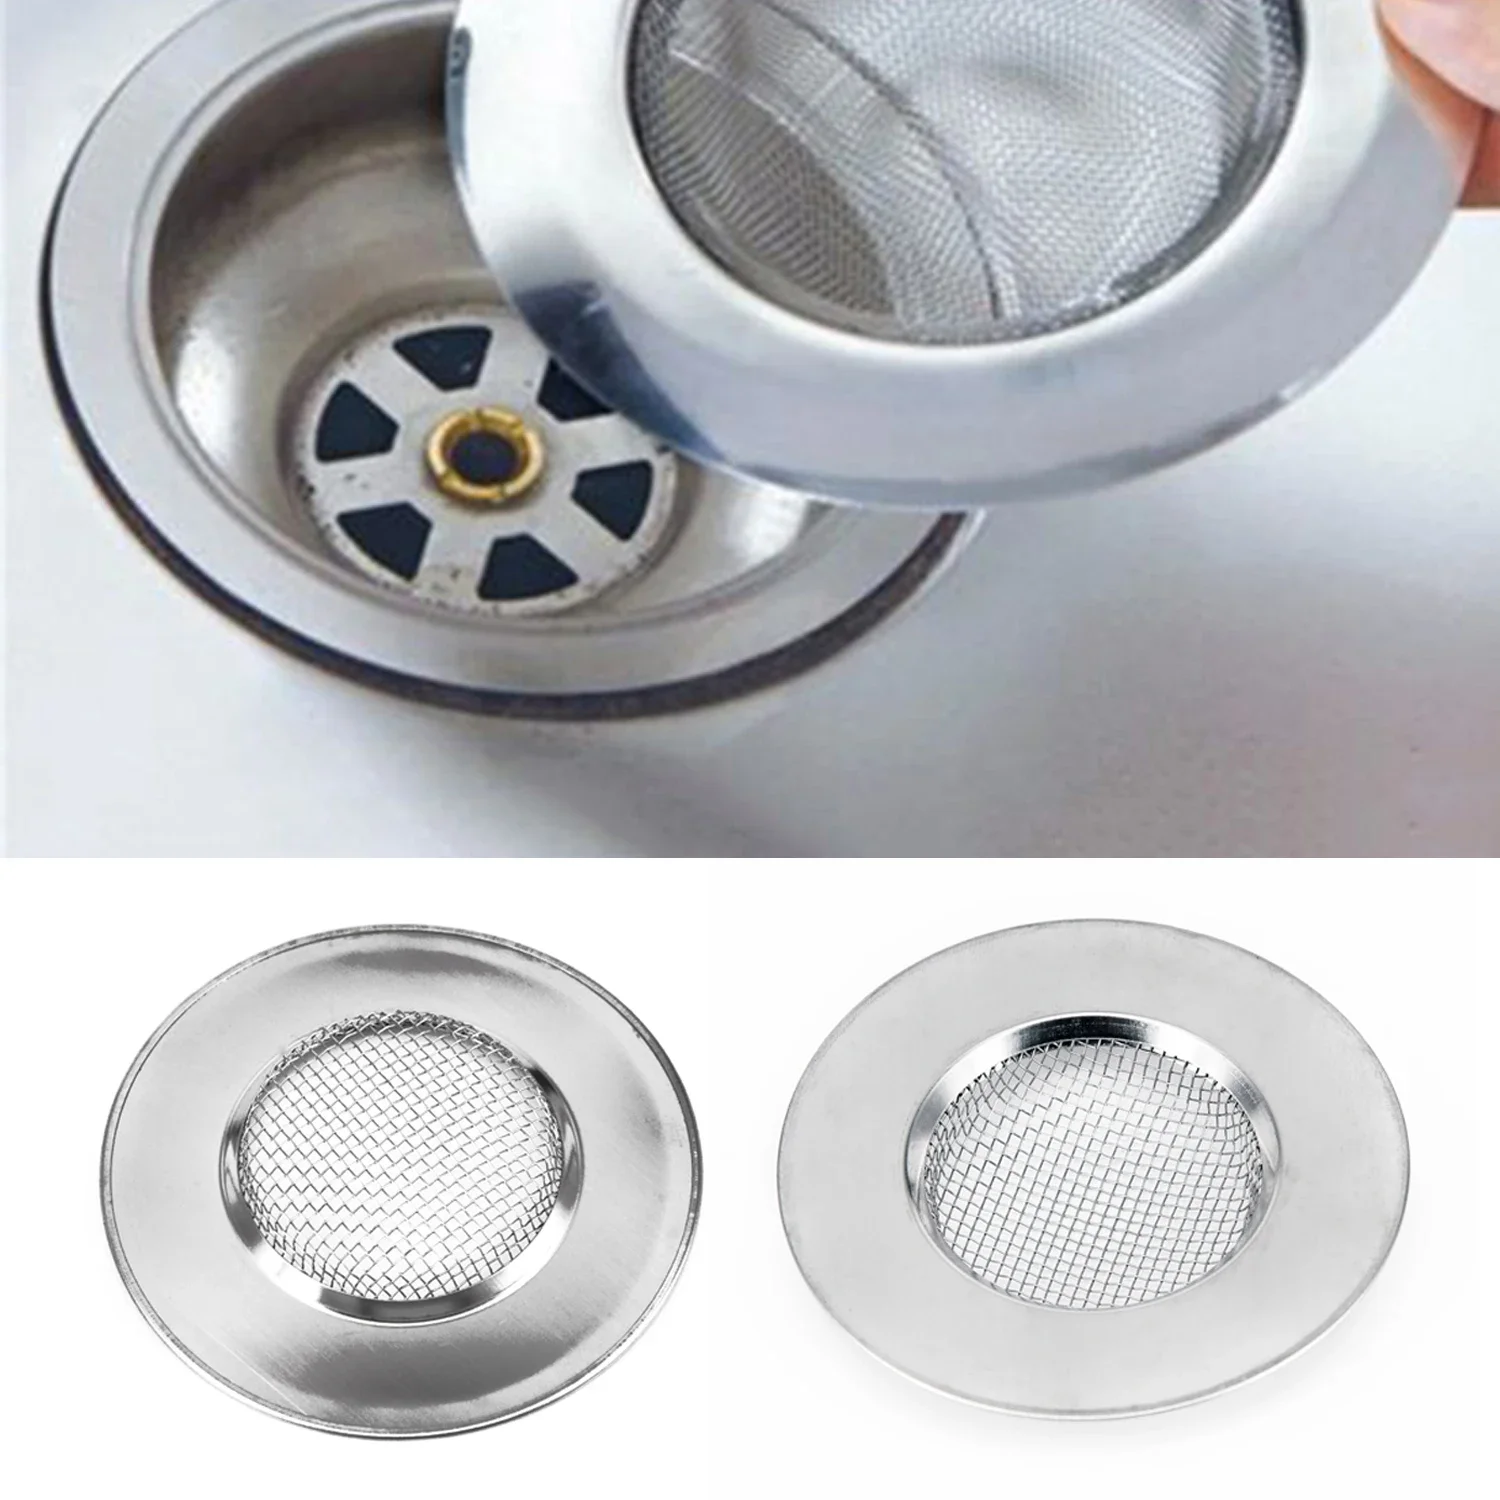 Stainless Steel Bathtub Hair Catcher Stopper Shower Drain Hole Filter With Handle Metal Sink Strainer Floor Drain For Kitchenl 1pc stainless steel bathtub hair catcher stopper shower drain hole filter trap kitchen metal sink strainer household accessories